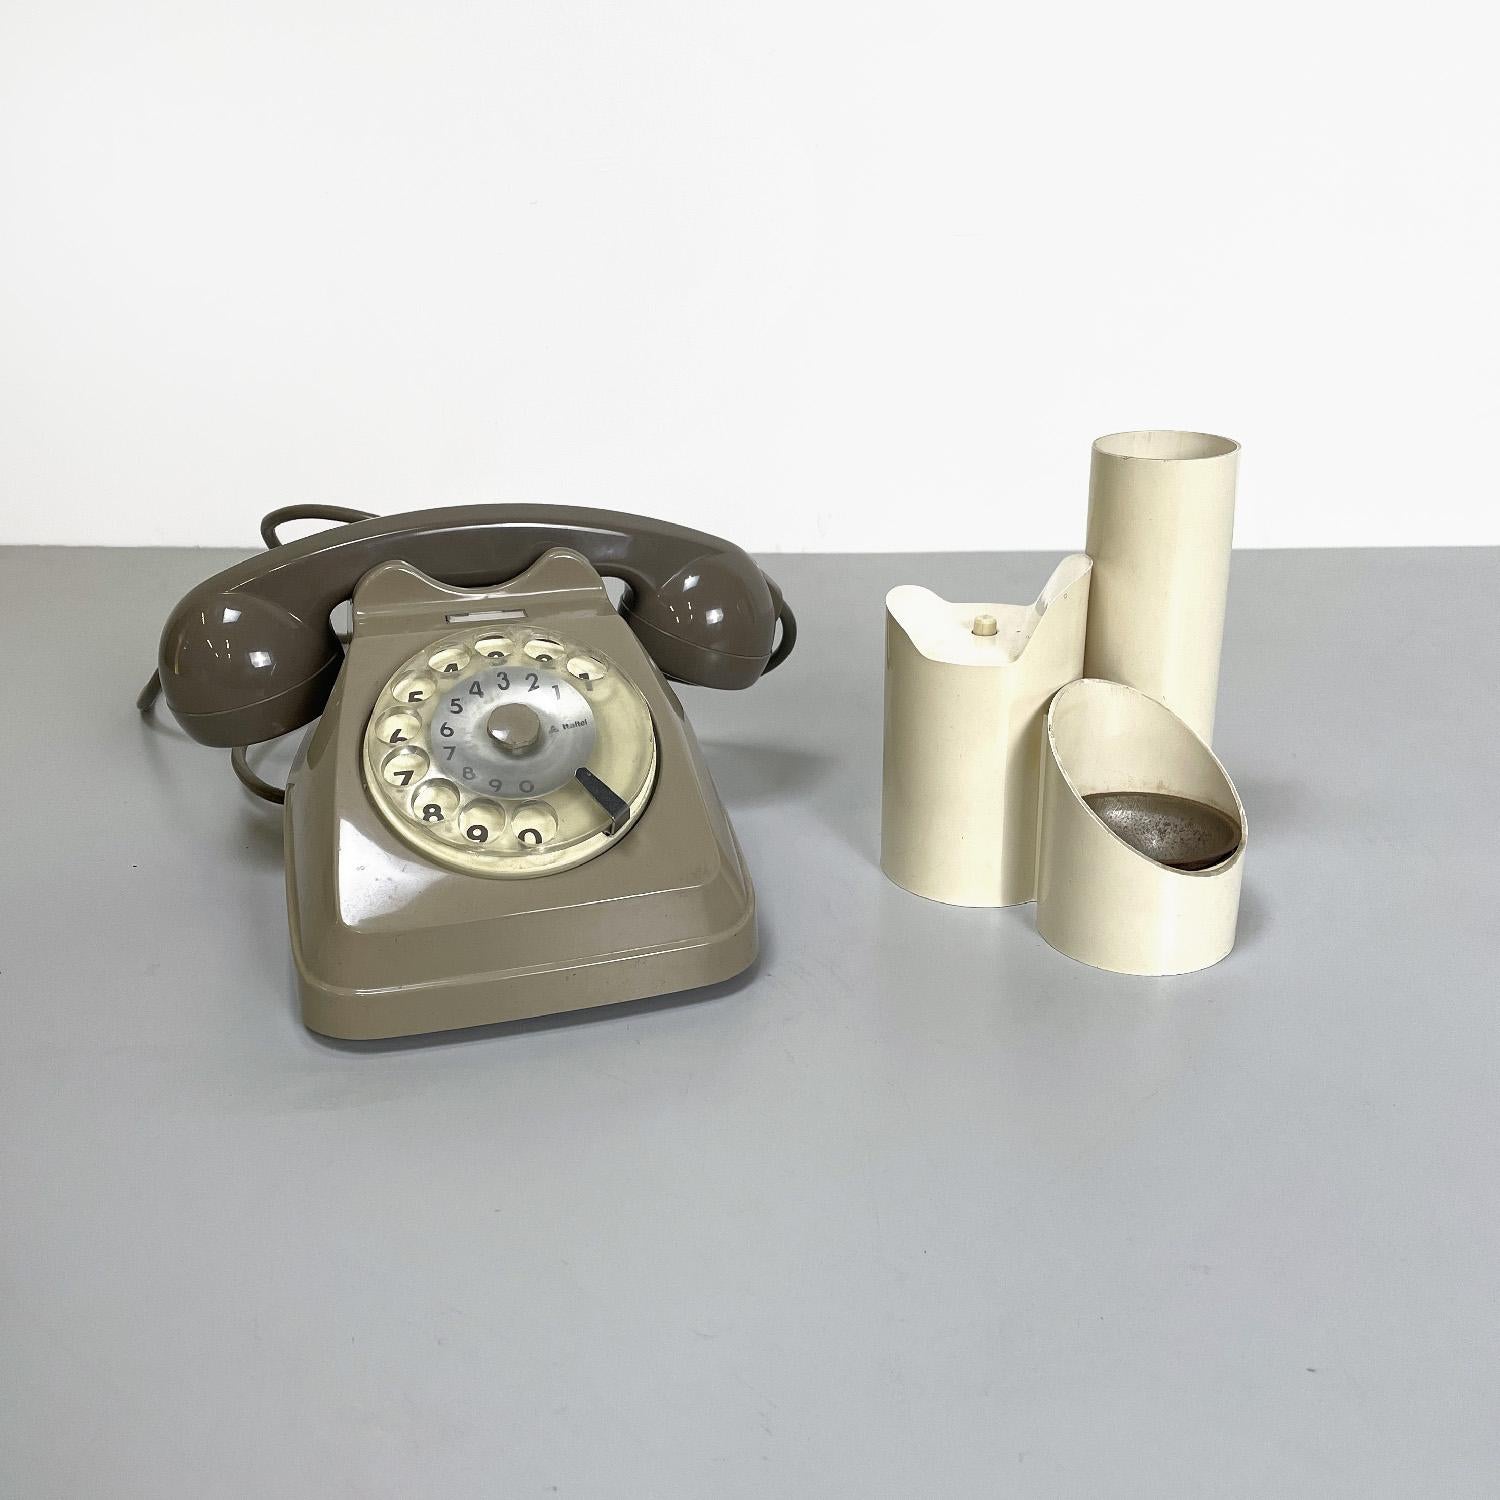 Italian mid-century Siemens Sip telephone with handset holder music box, 1960s
Set consisting of a landline telephone with rotary dial mod. Sip and handset music box. The phone is made of where gray plastic with a transparent disc. The handset